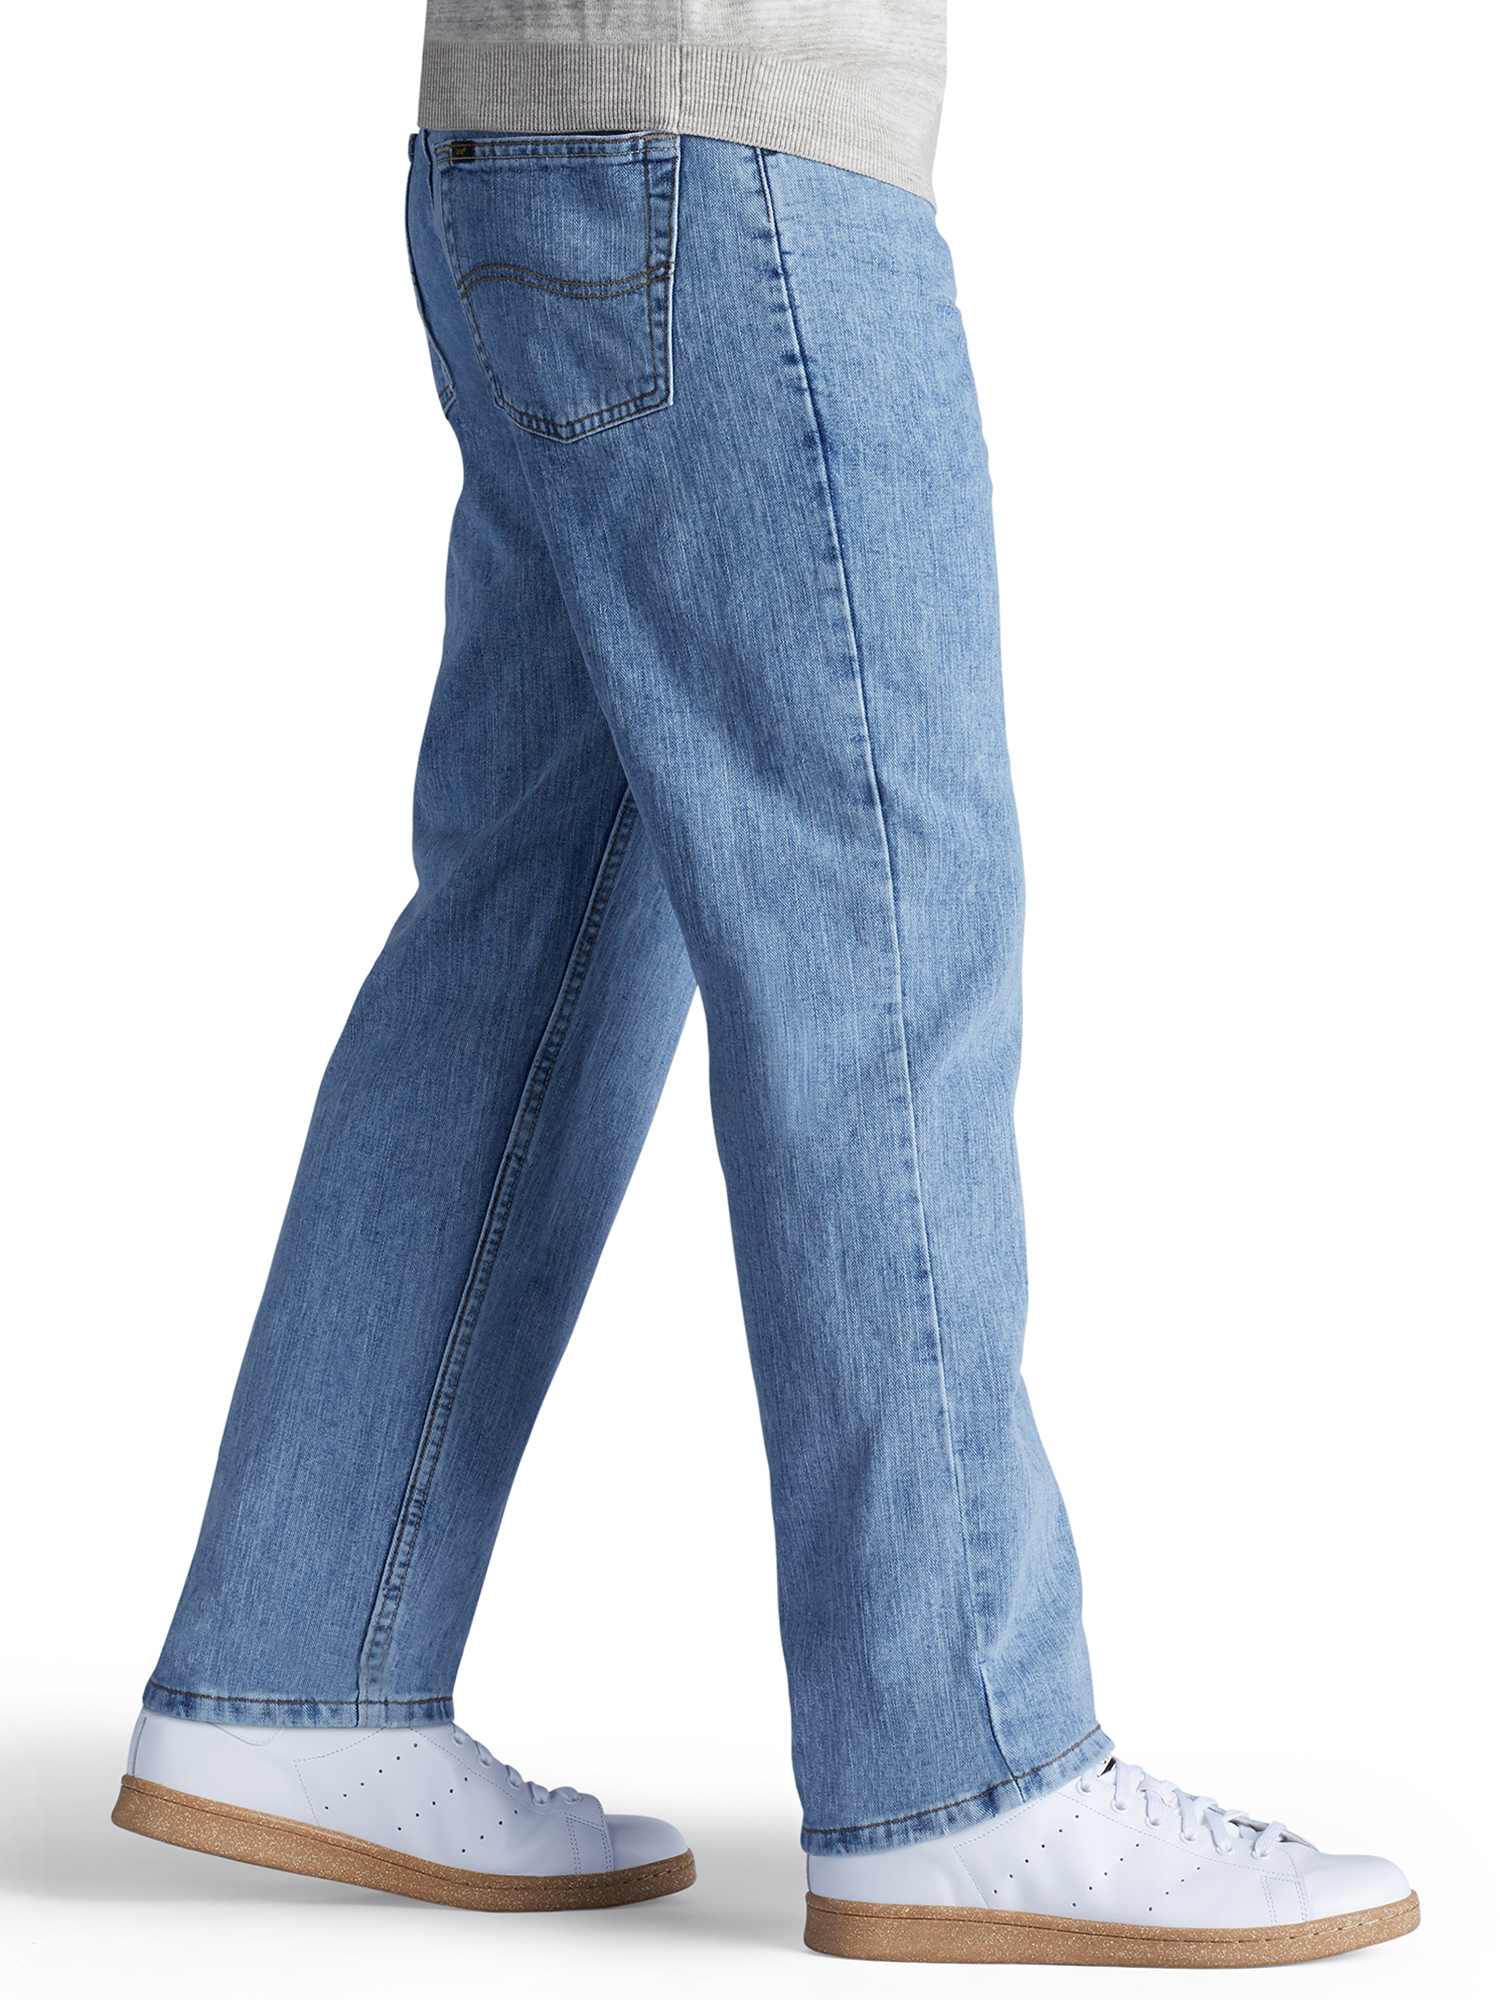 Lee Men's Relaxed Fit Straight Leg Jeans - image 2 of 5